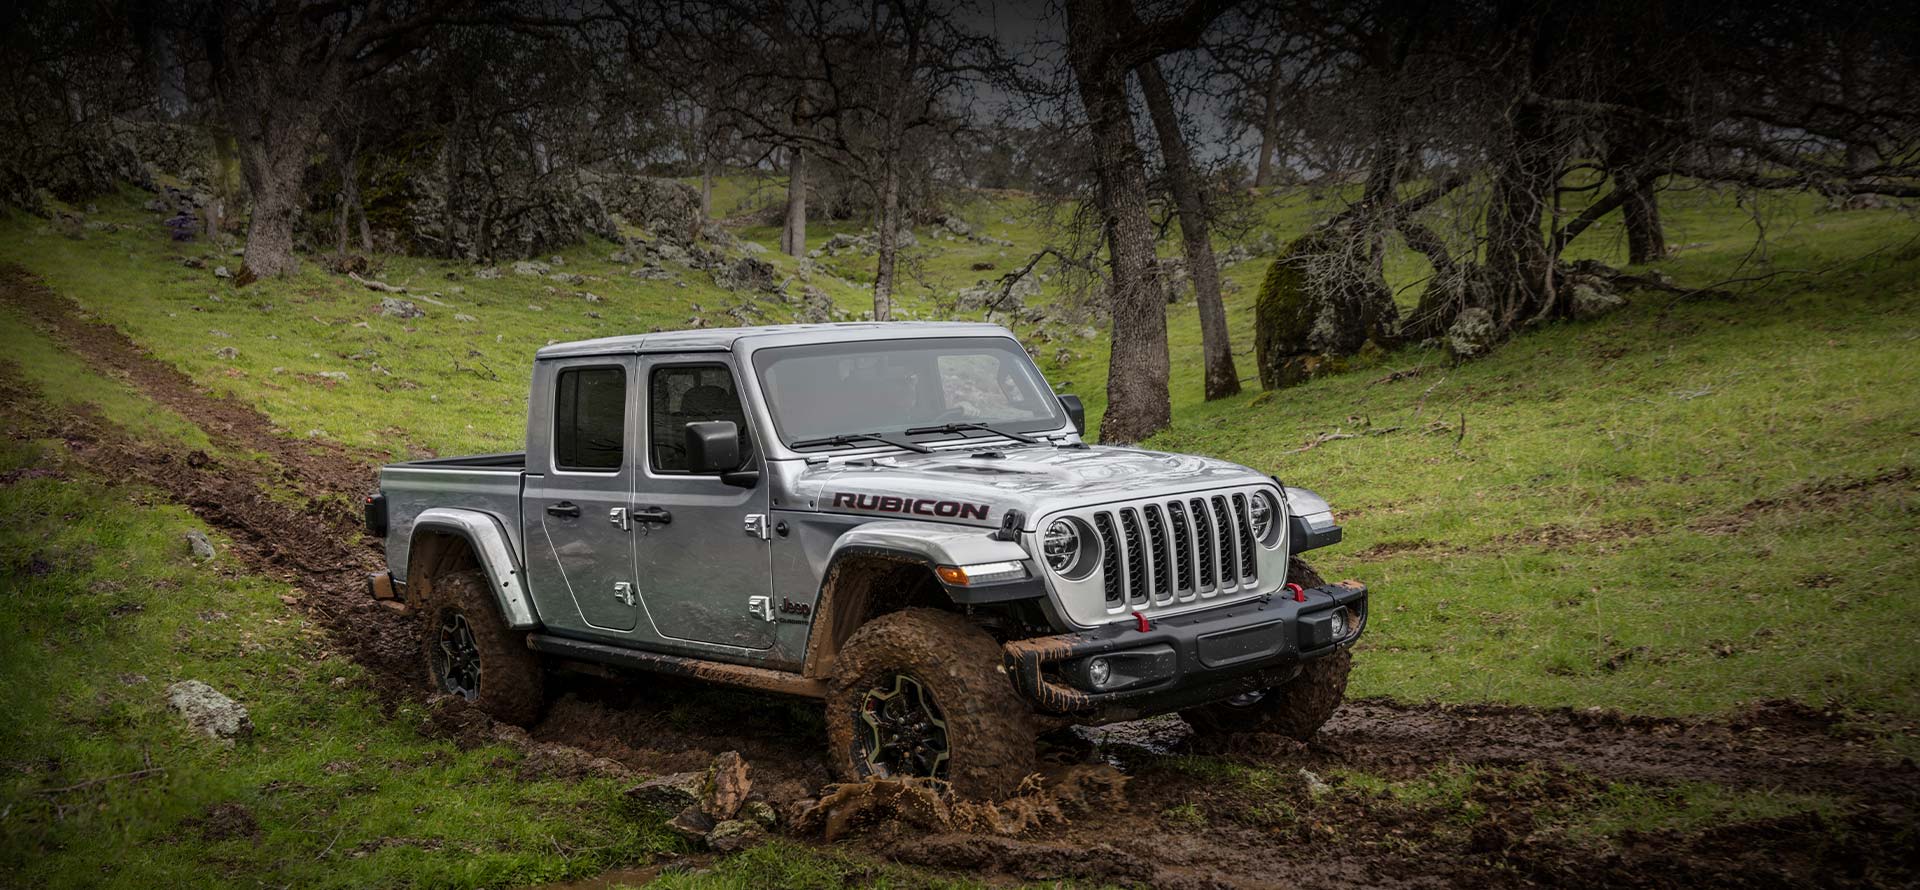 The 2022 Jeep Gladiator Rubicon being driven through a deep, muddy track on a hill.